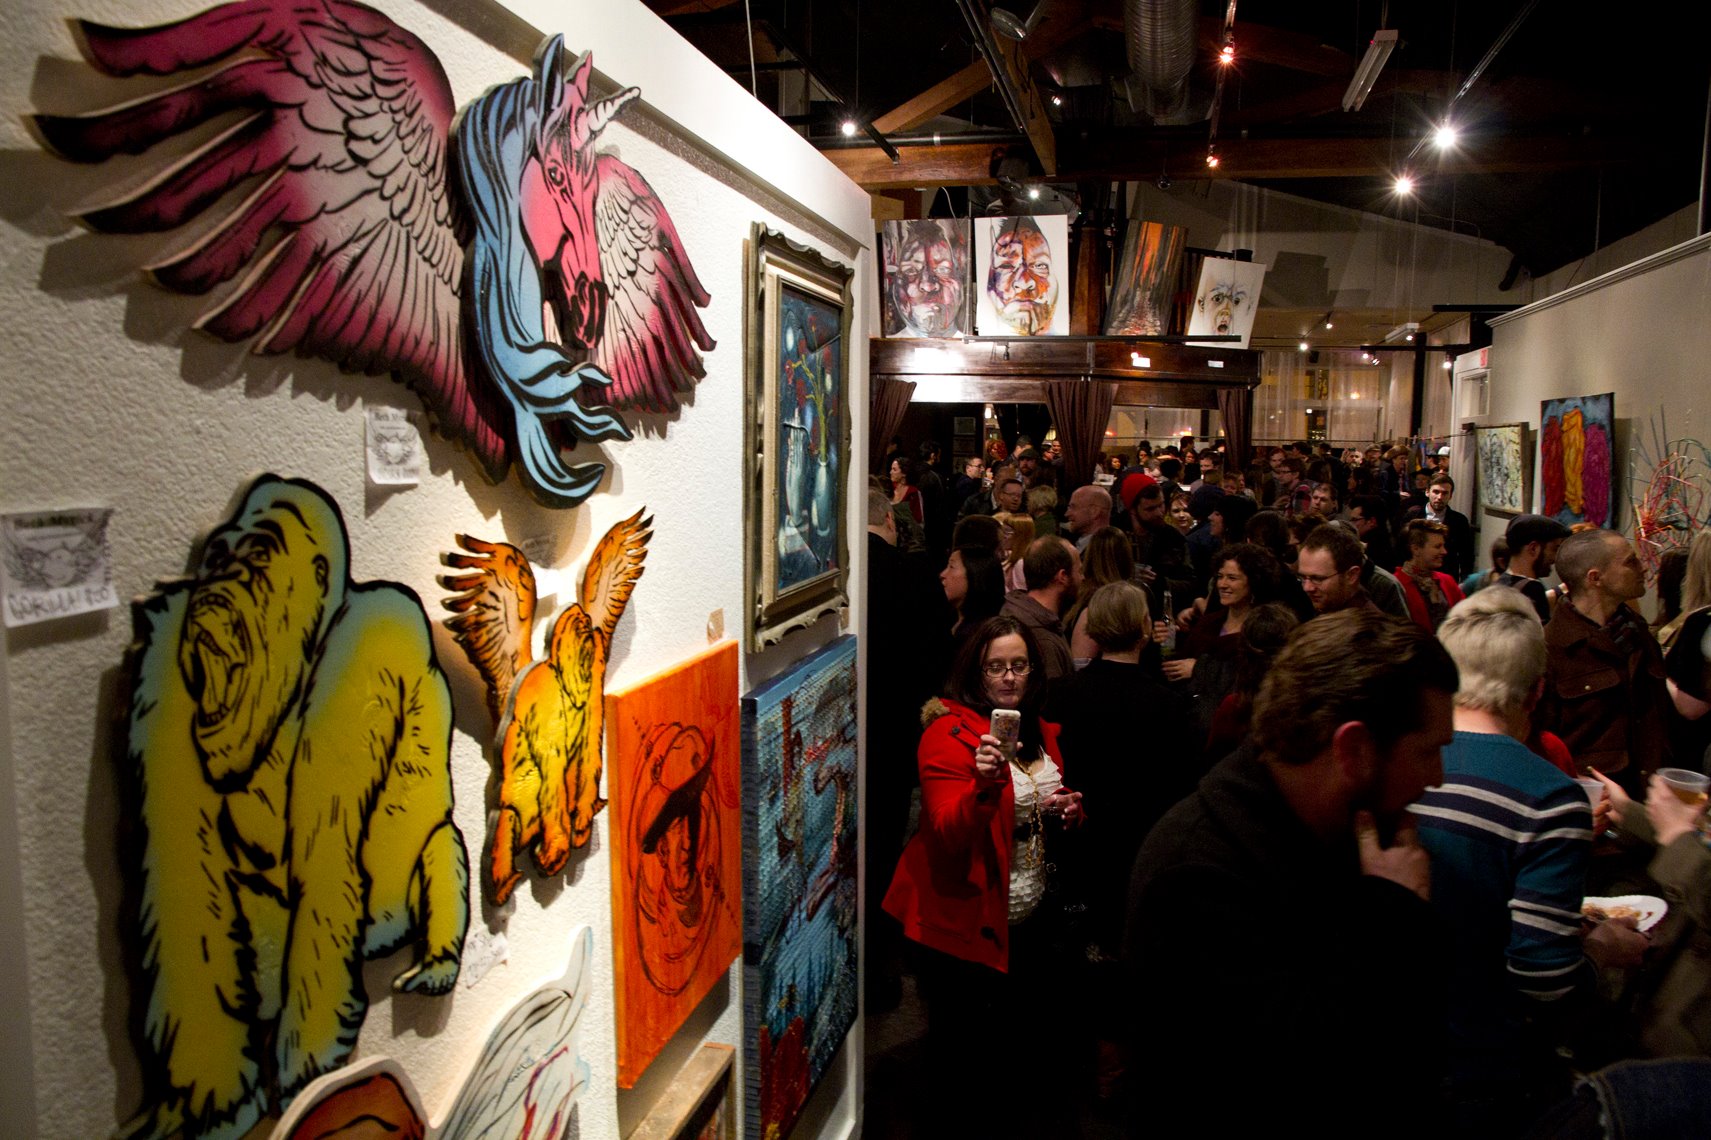 Experience Booze, Pancakes And Art At NYC’s Pancakes & Booze Art Show 